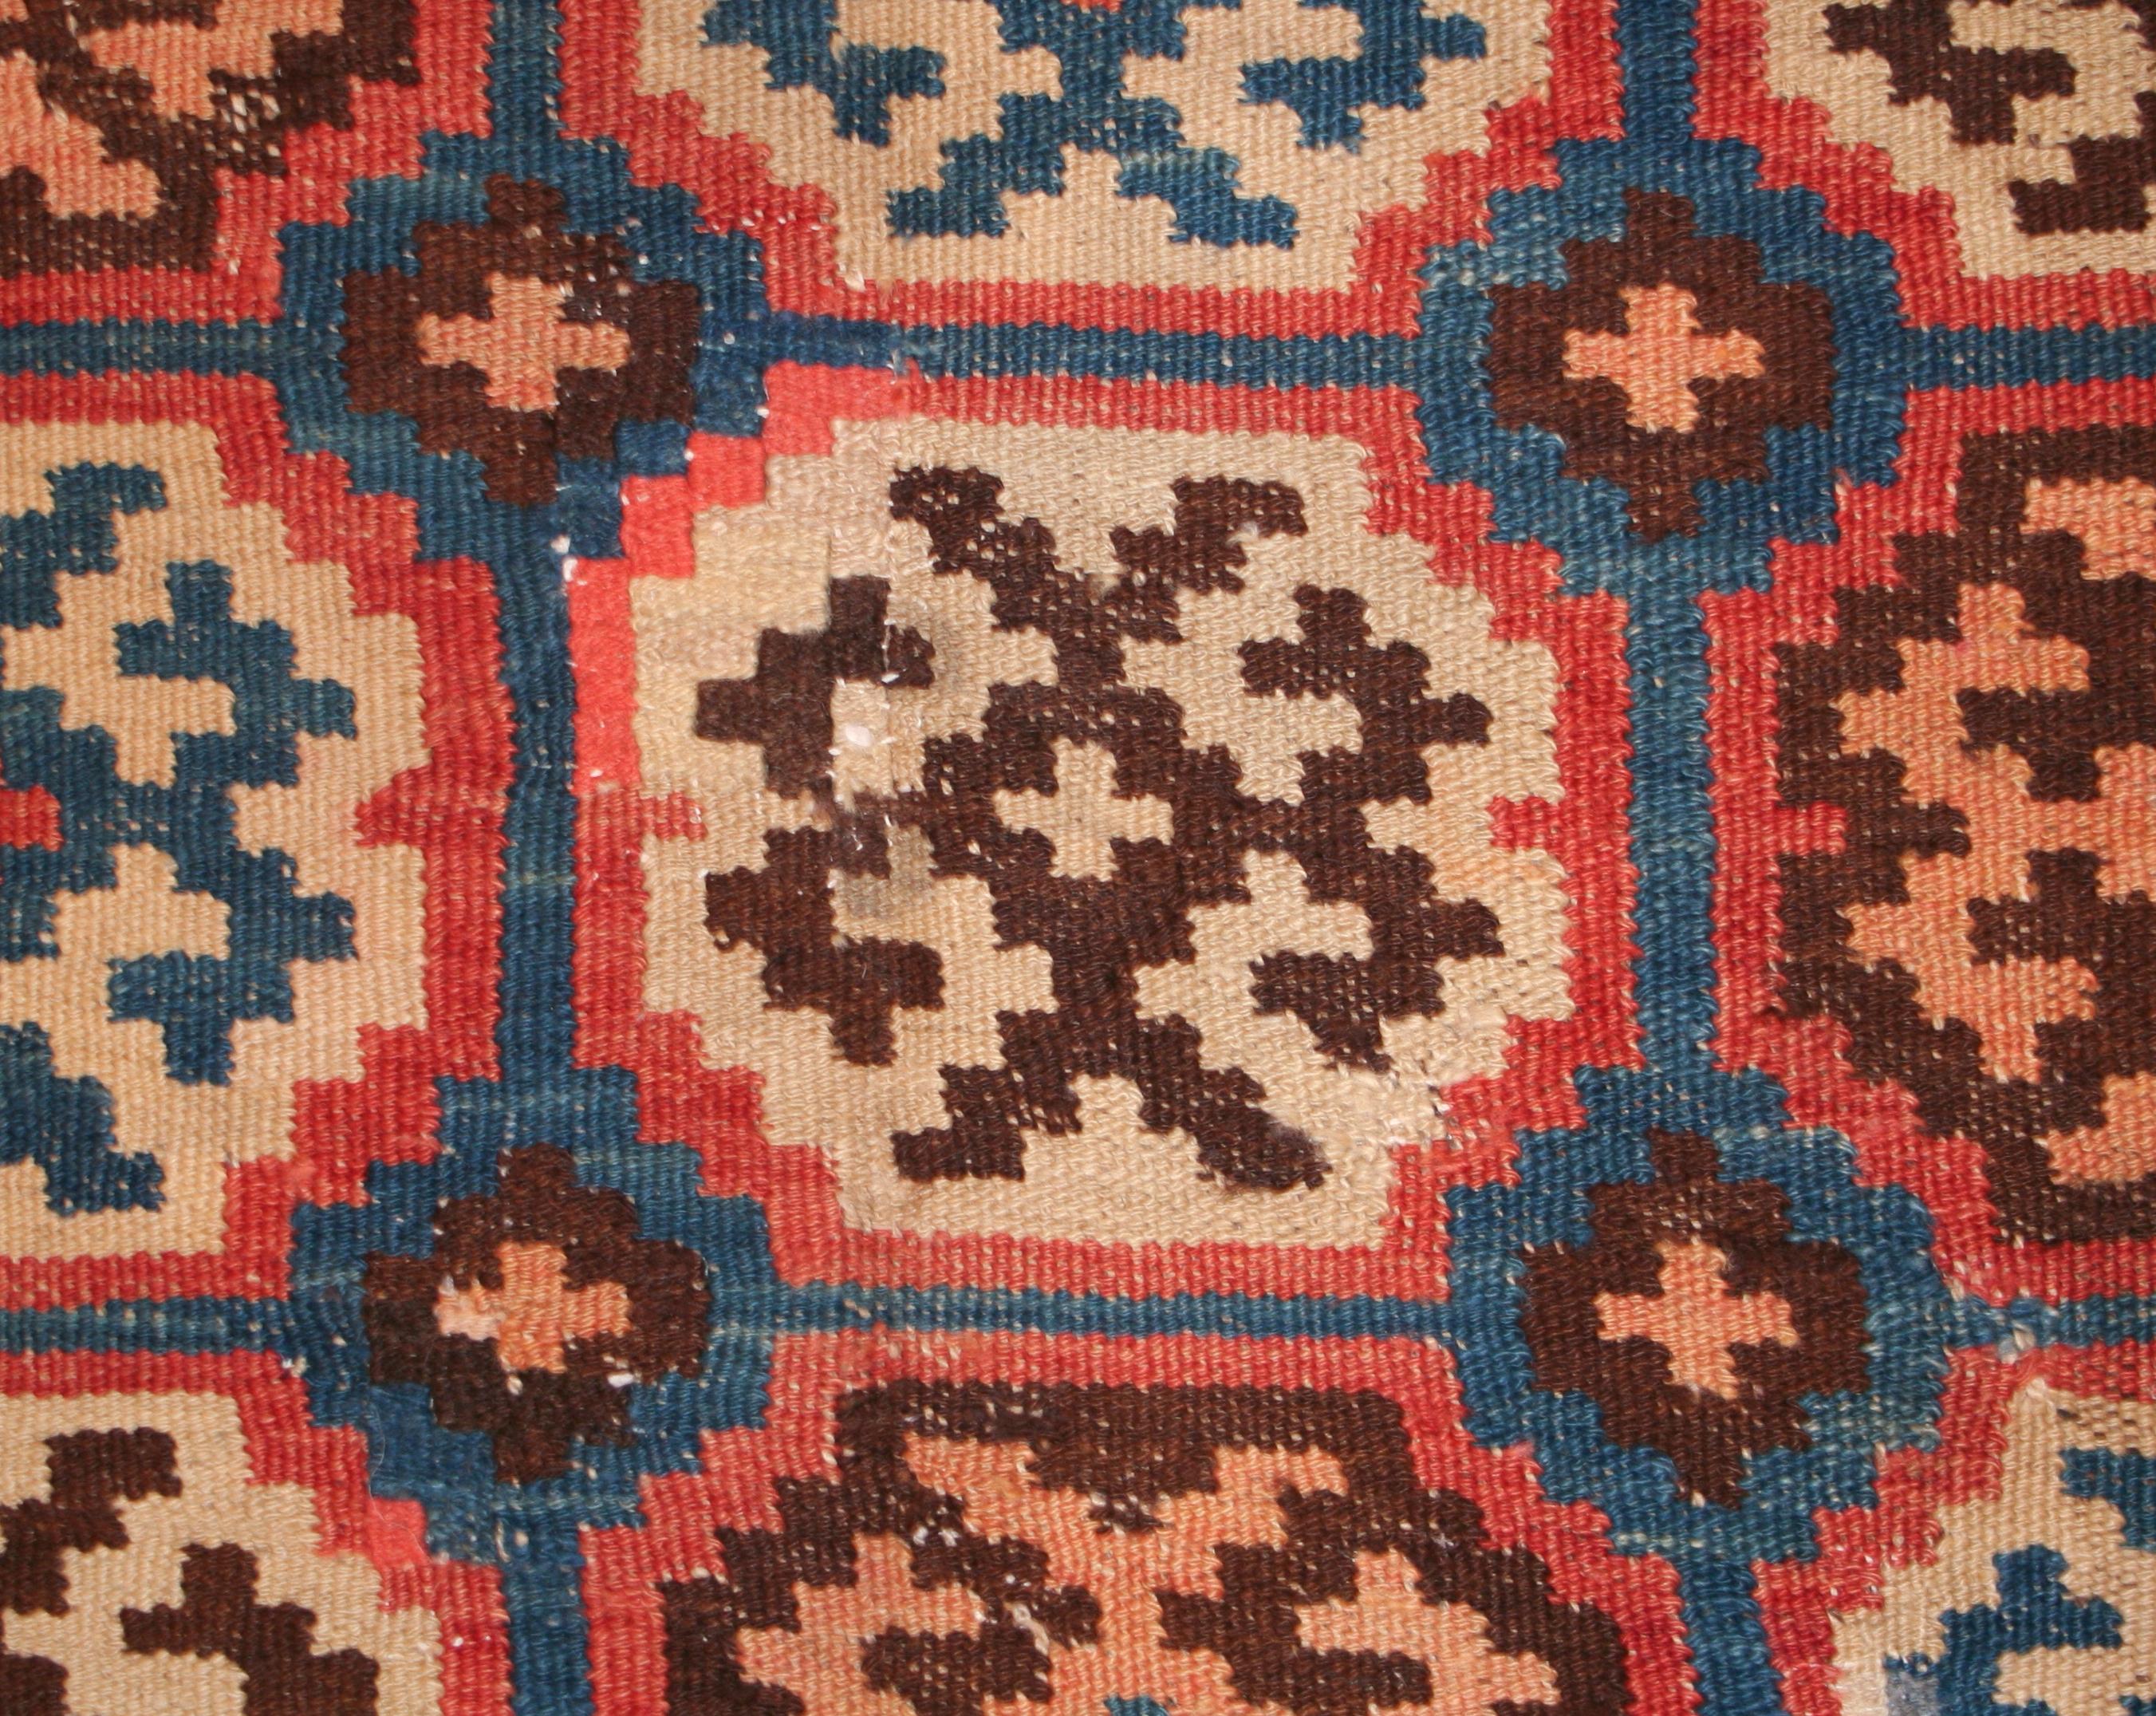 Hand-Woven Rare and Unusual Antique Khotan Kilim Rug For Sale